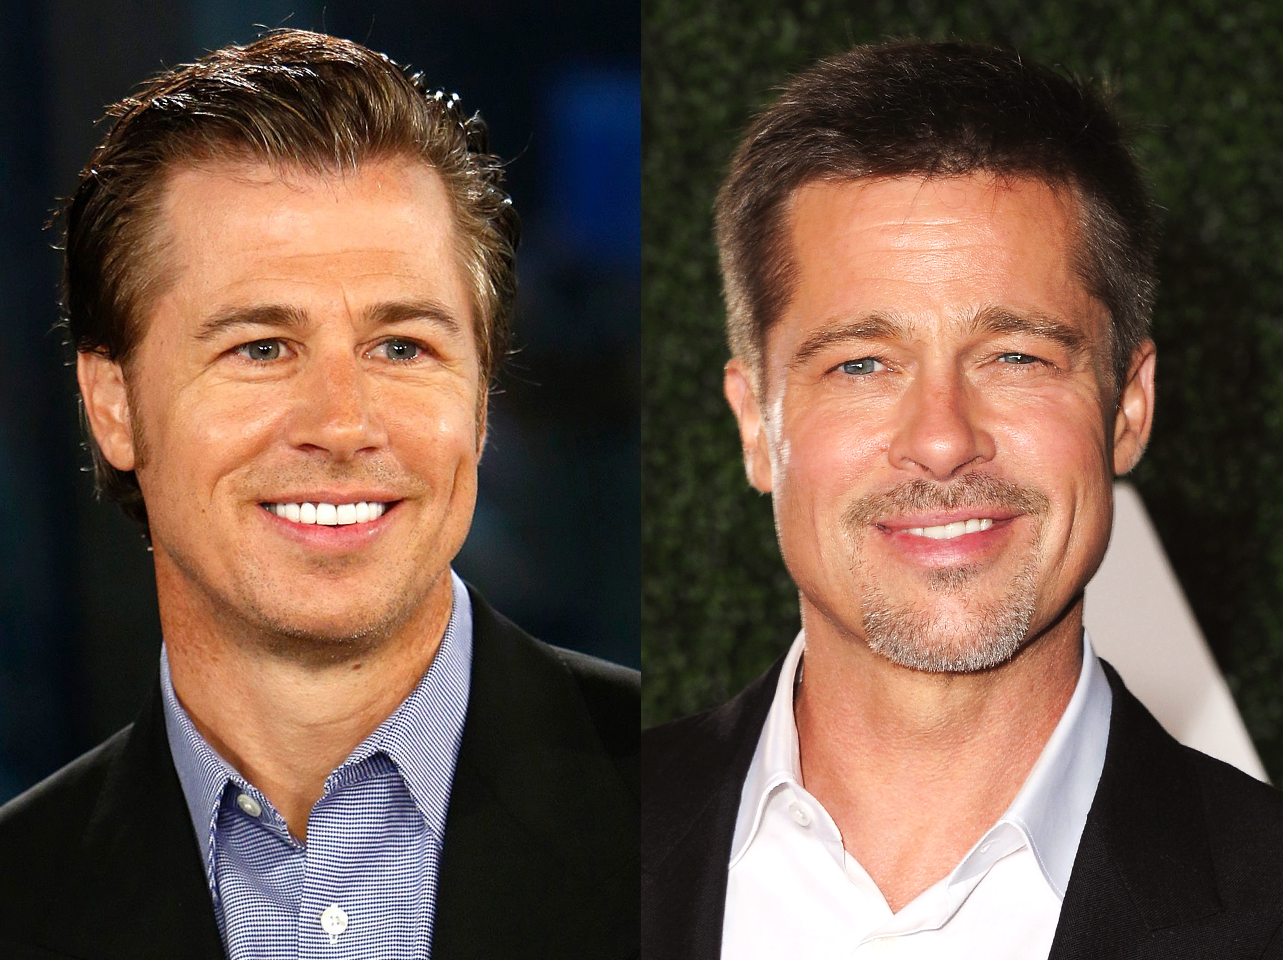 Doug and Brad Pitt | Source: Getty Images